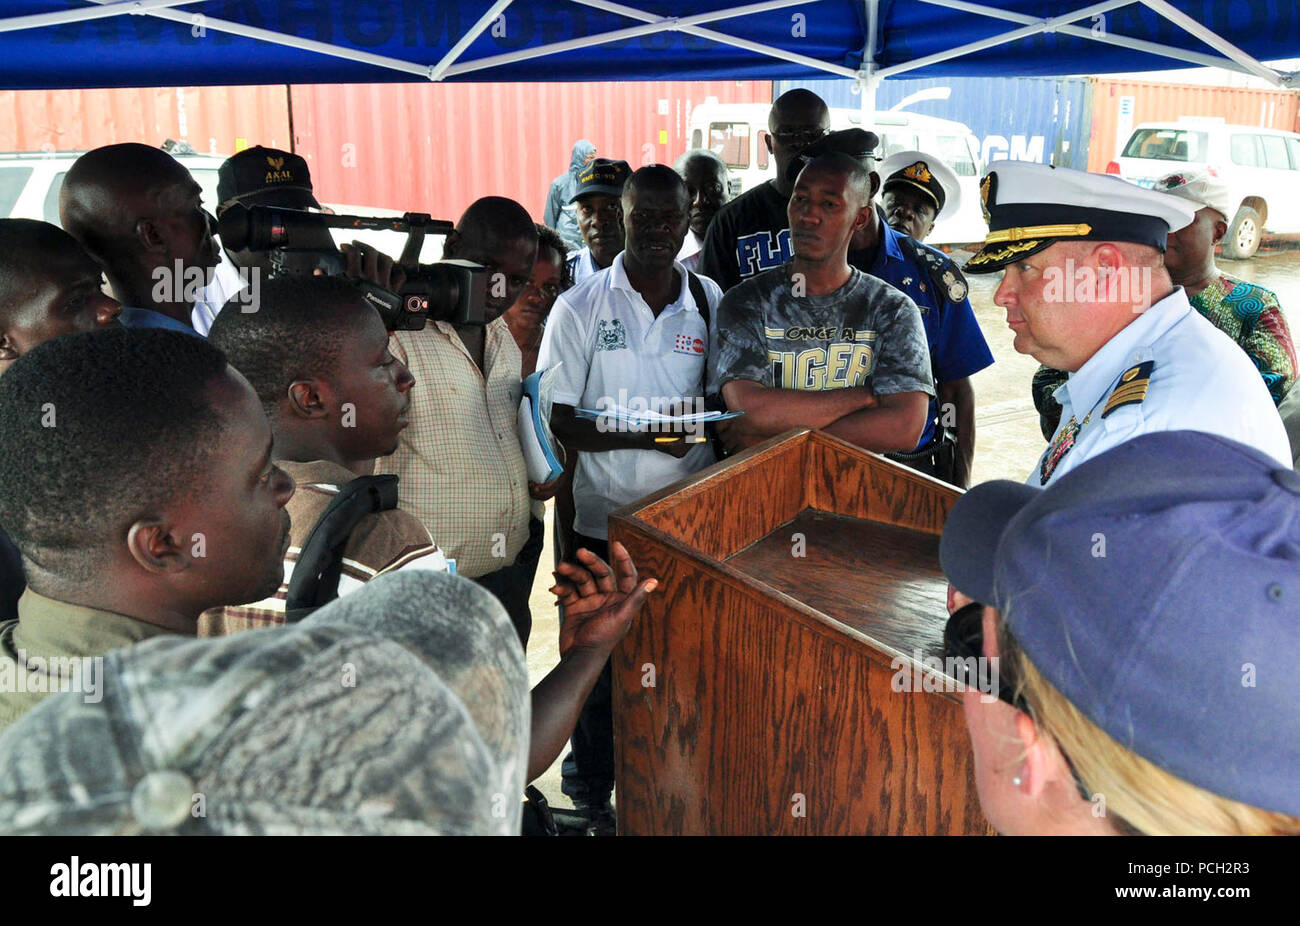 Cmdr. Robert T. Hendrickson, commanding officer of U.S. Coast Guard Cutter Mohawk (WMEC 913), speaks to local media during a press conference on the pier during a port visit to Freetown. Mohawk recently participated in the African Maritime Law Enforcement Partnership, a mission that focuses on enhancing cooperative partnerships with regional maritime services to achieve common international goals such as stability and security. Mohawk, homeported in Key West, Fla., is on a scheduled deployment in the U.S. 6th Fleet area of responsibility. ( Stock Photo